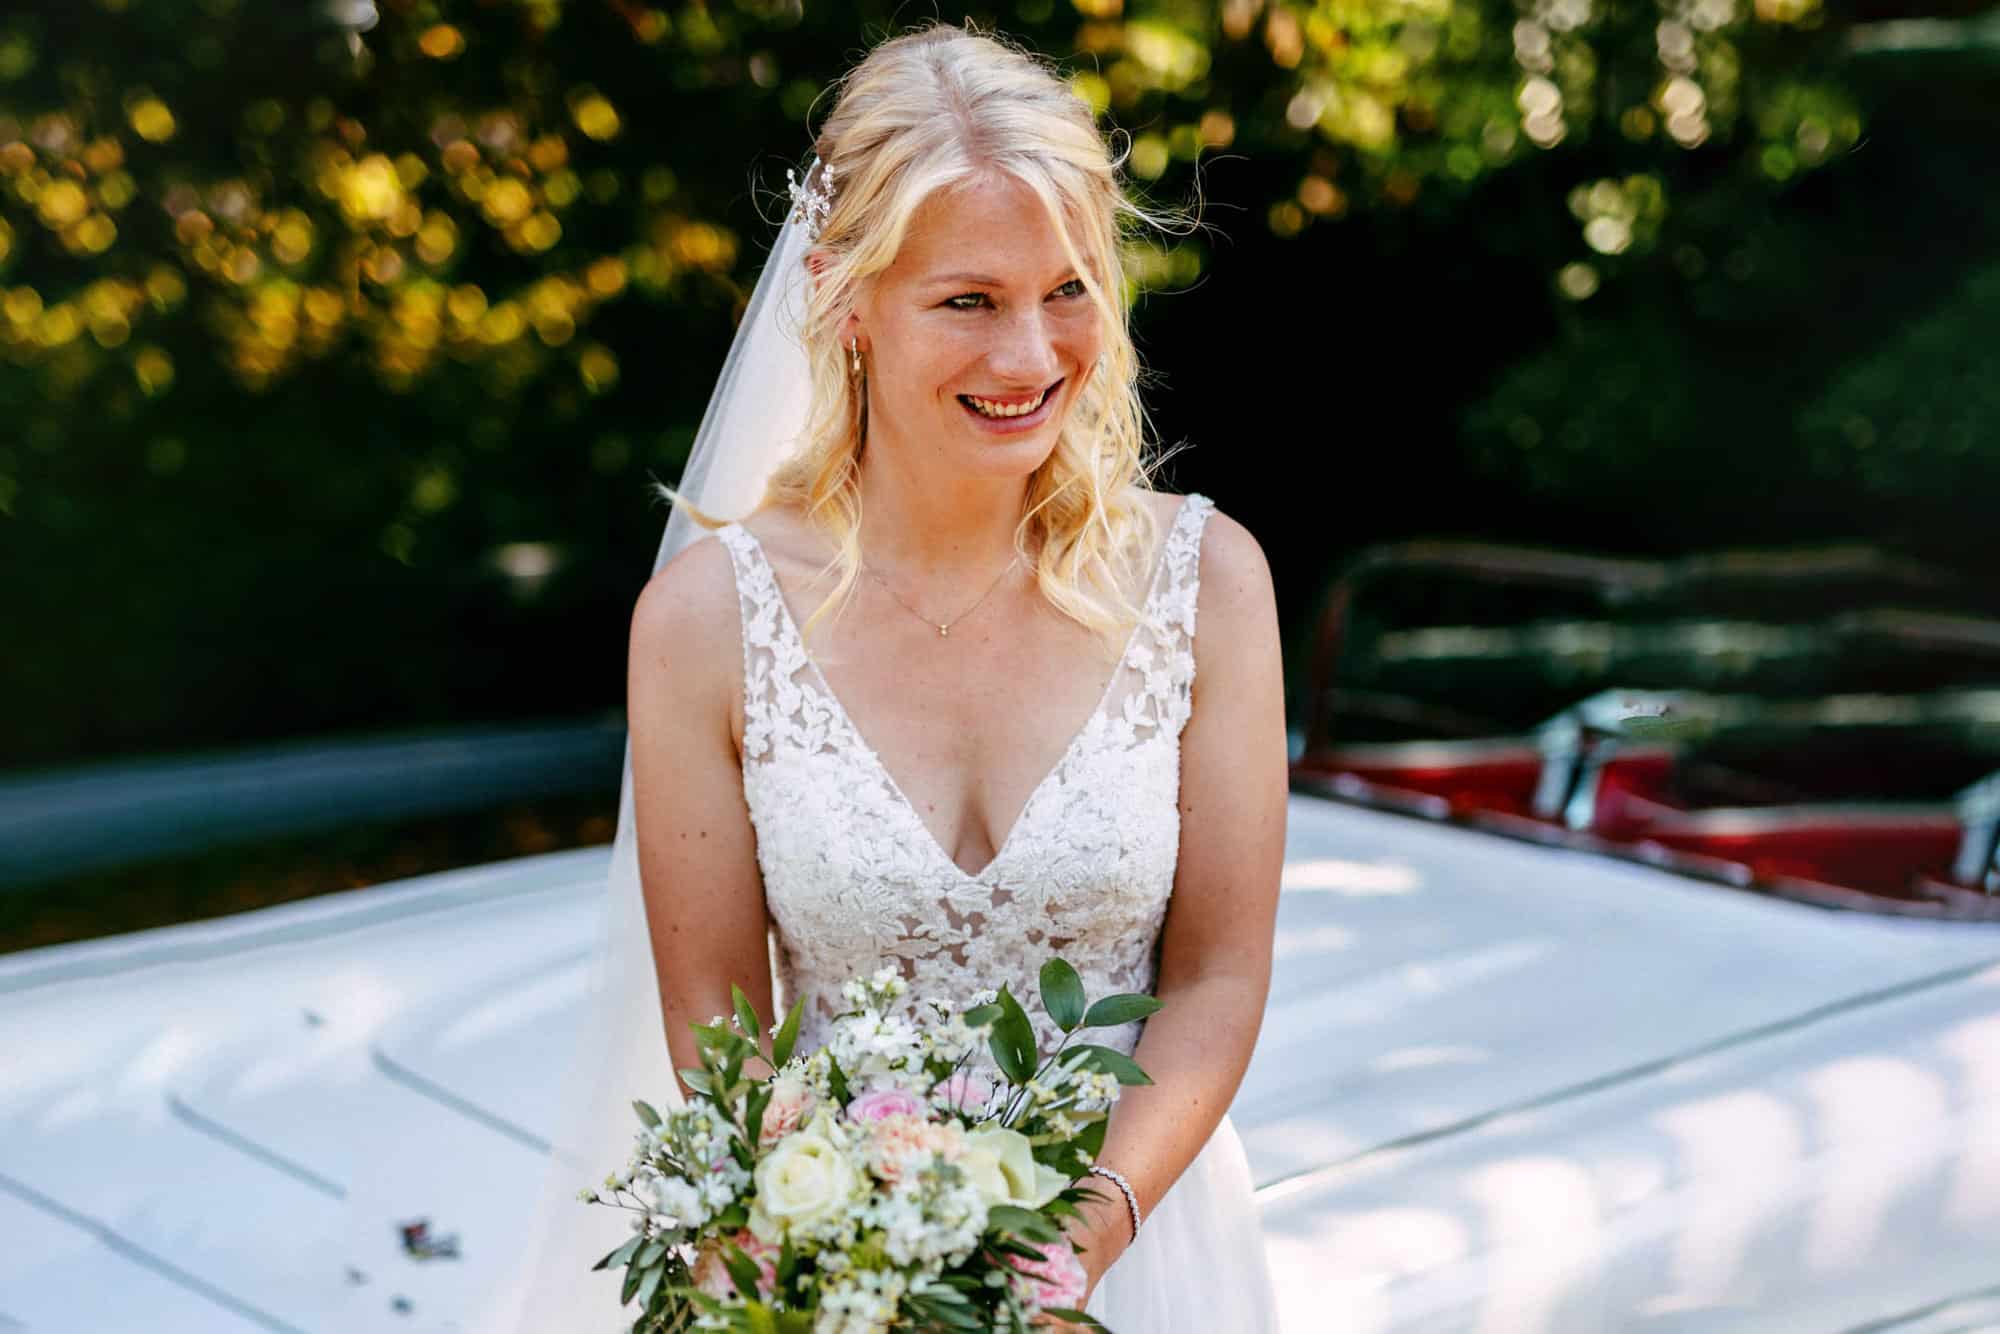 A bride in a wedding dress stands in front of a classic car.